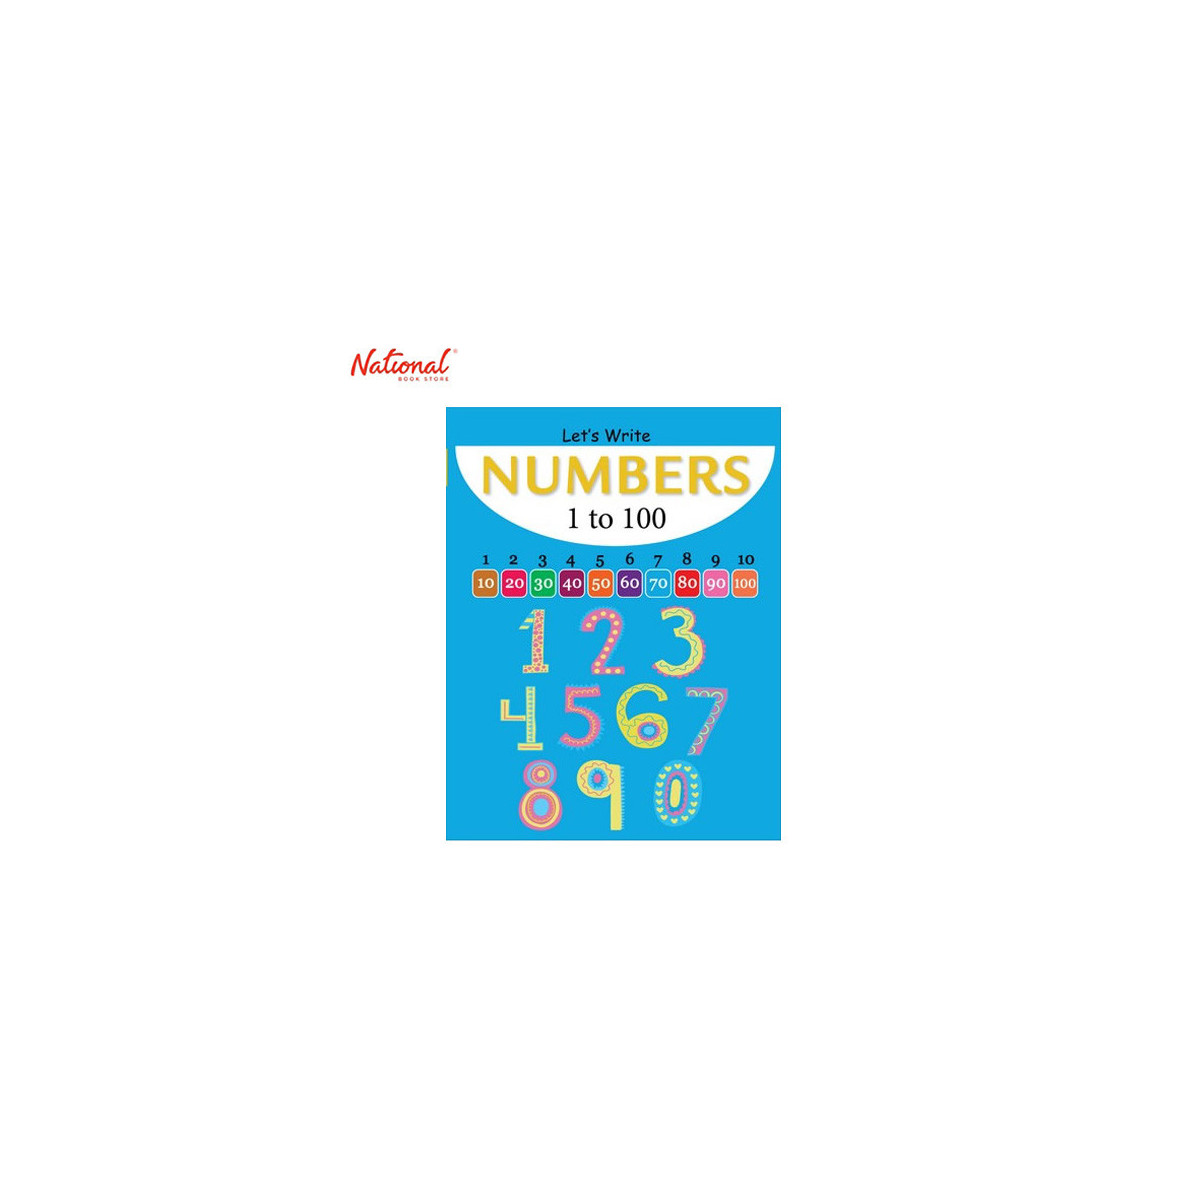 Let's Write Numbers 1-100 Trade Paperback